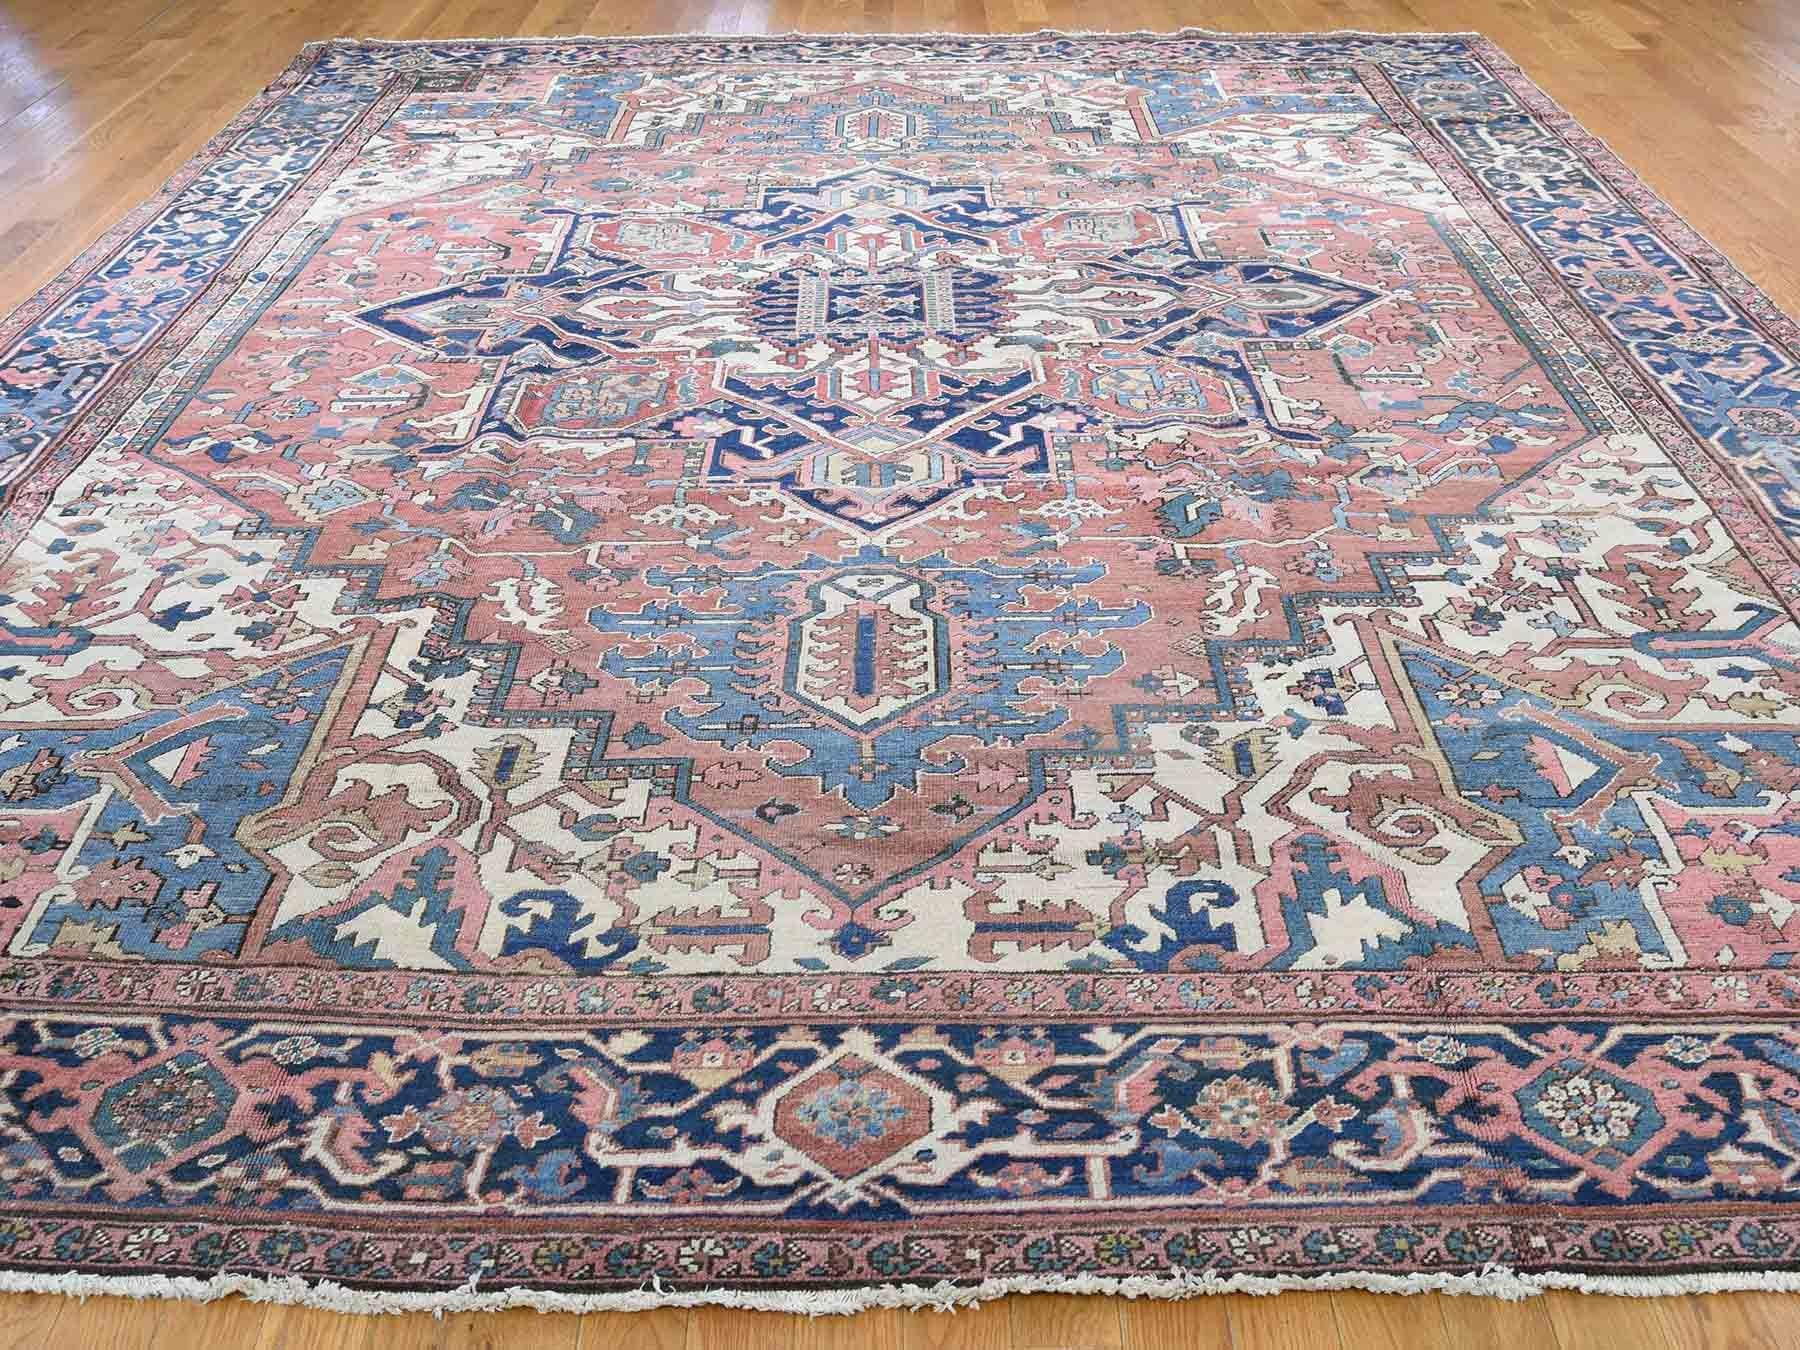 Hand-Knotted 1890 Antique Persian Heriz Serapi Rug, Even Wear